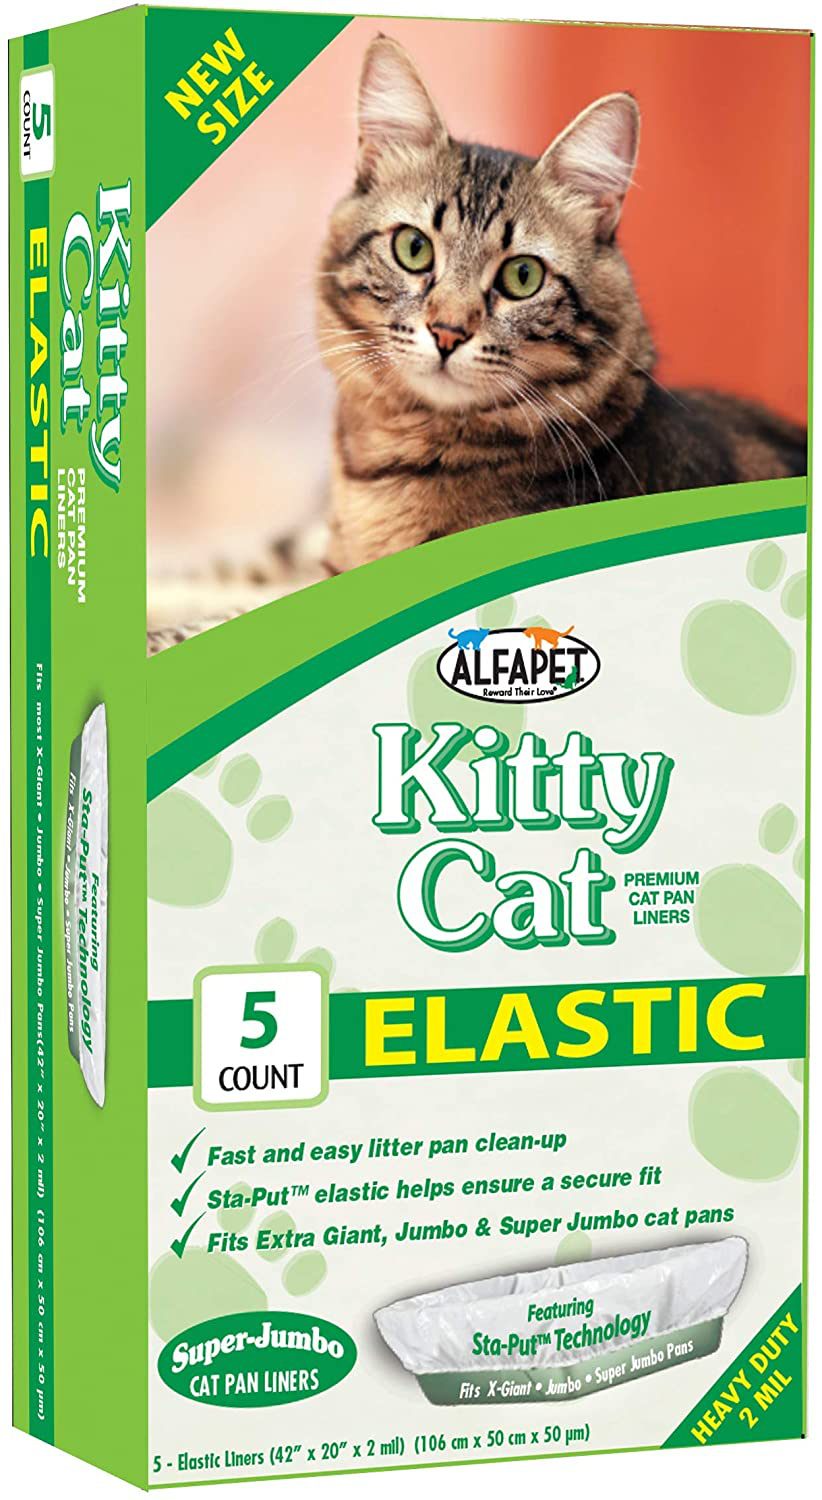 Alfapet Kitty Cat Pan Litter Box Disposable, Elastic Liners-5-Pack-For Extra-Giant, Jumbo, Super-Jumbo Size Litter Pans- with Sta-Put Technology for Firm, Easy Fit- Quick + Clever Waste Cleaners Animals & Pet Supplies > Pet Supplies > Cat Supplies > Cat Litter Box Liners alfapet   